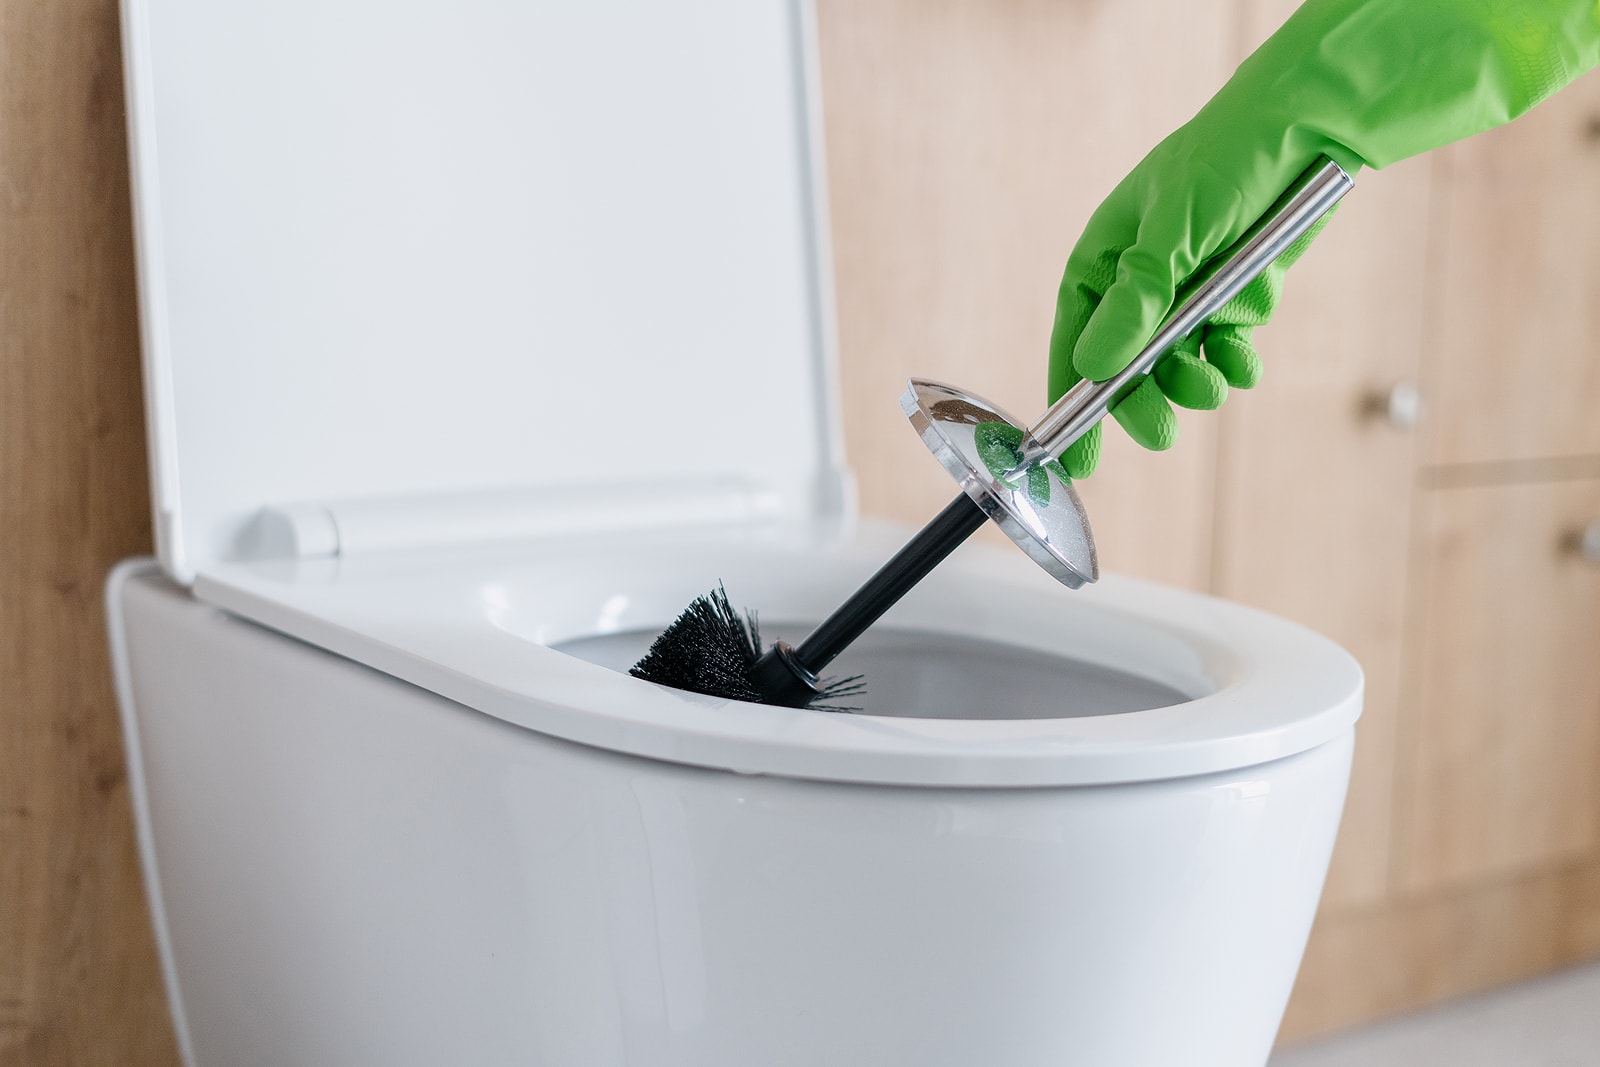 Clogged Toilet? Here's How To Fix It!